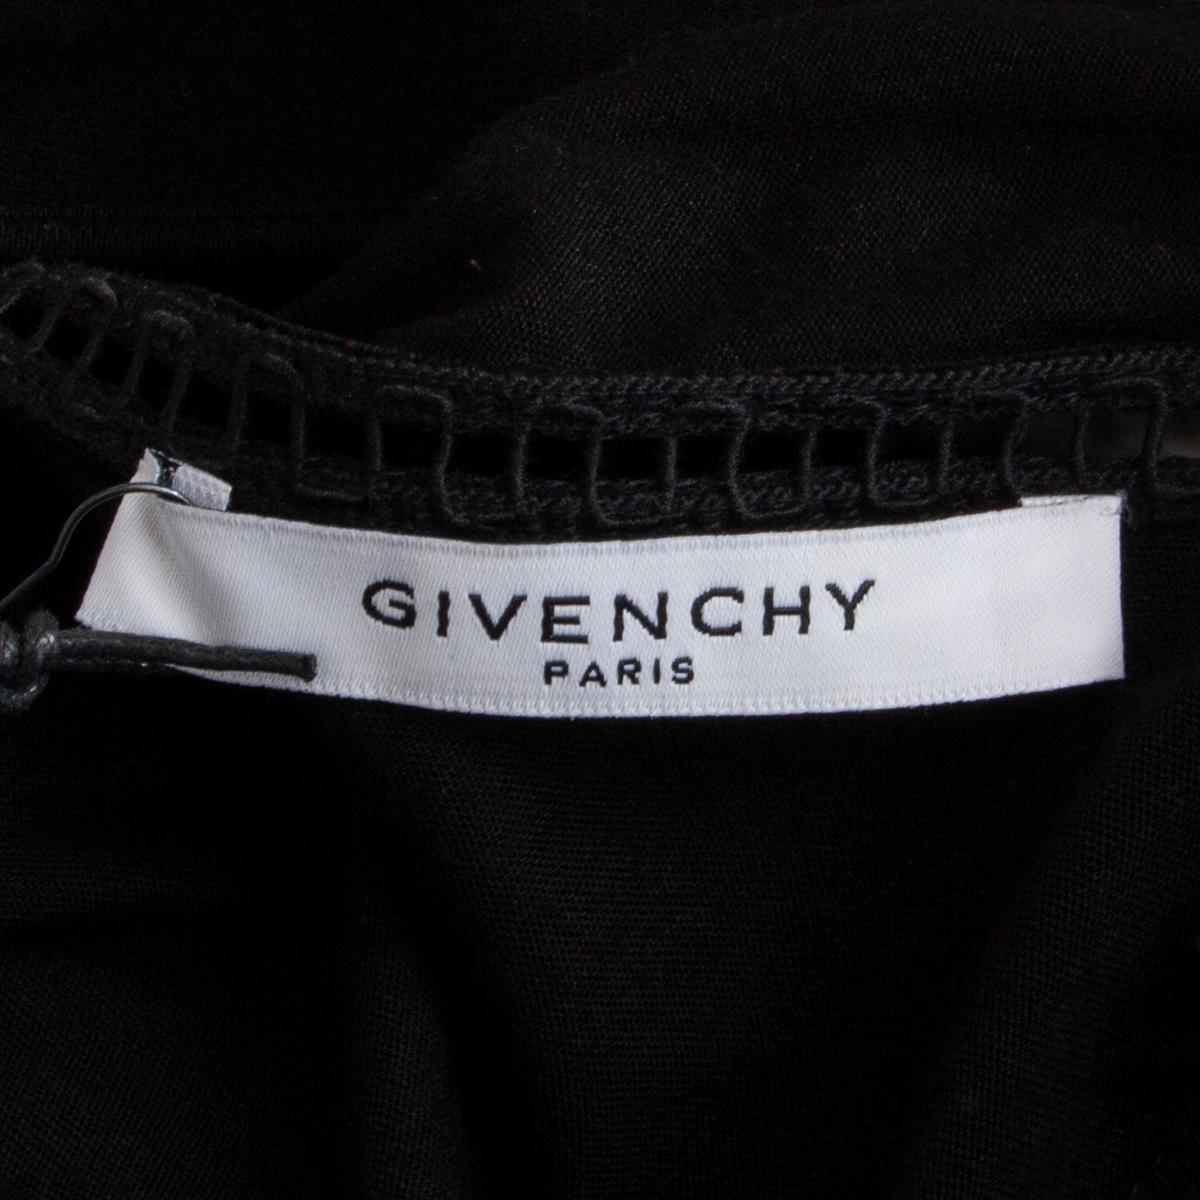 GIVENCHY black viscose jersey RUFFLED COLD SHOULDER MINI COCKTAIL Dress 38 S For Sale 1